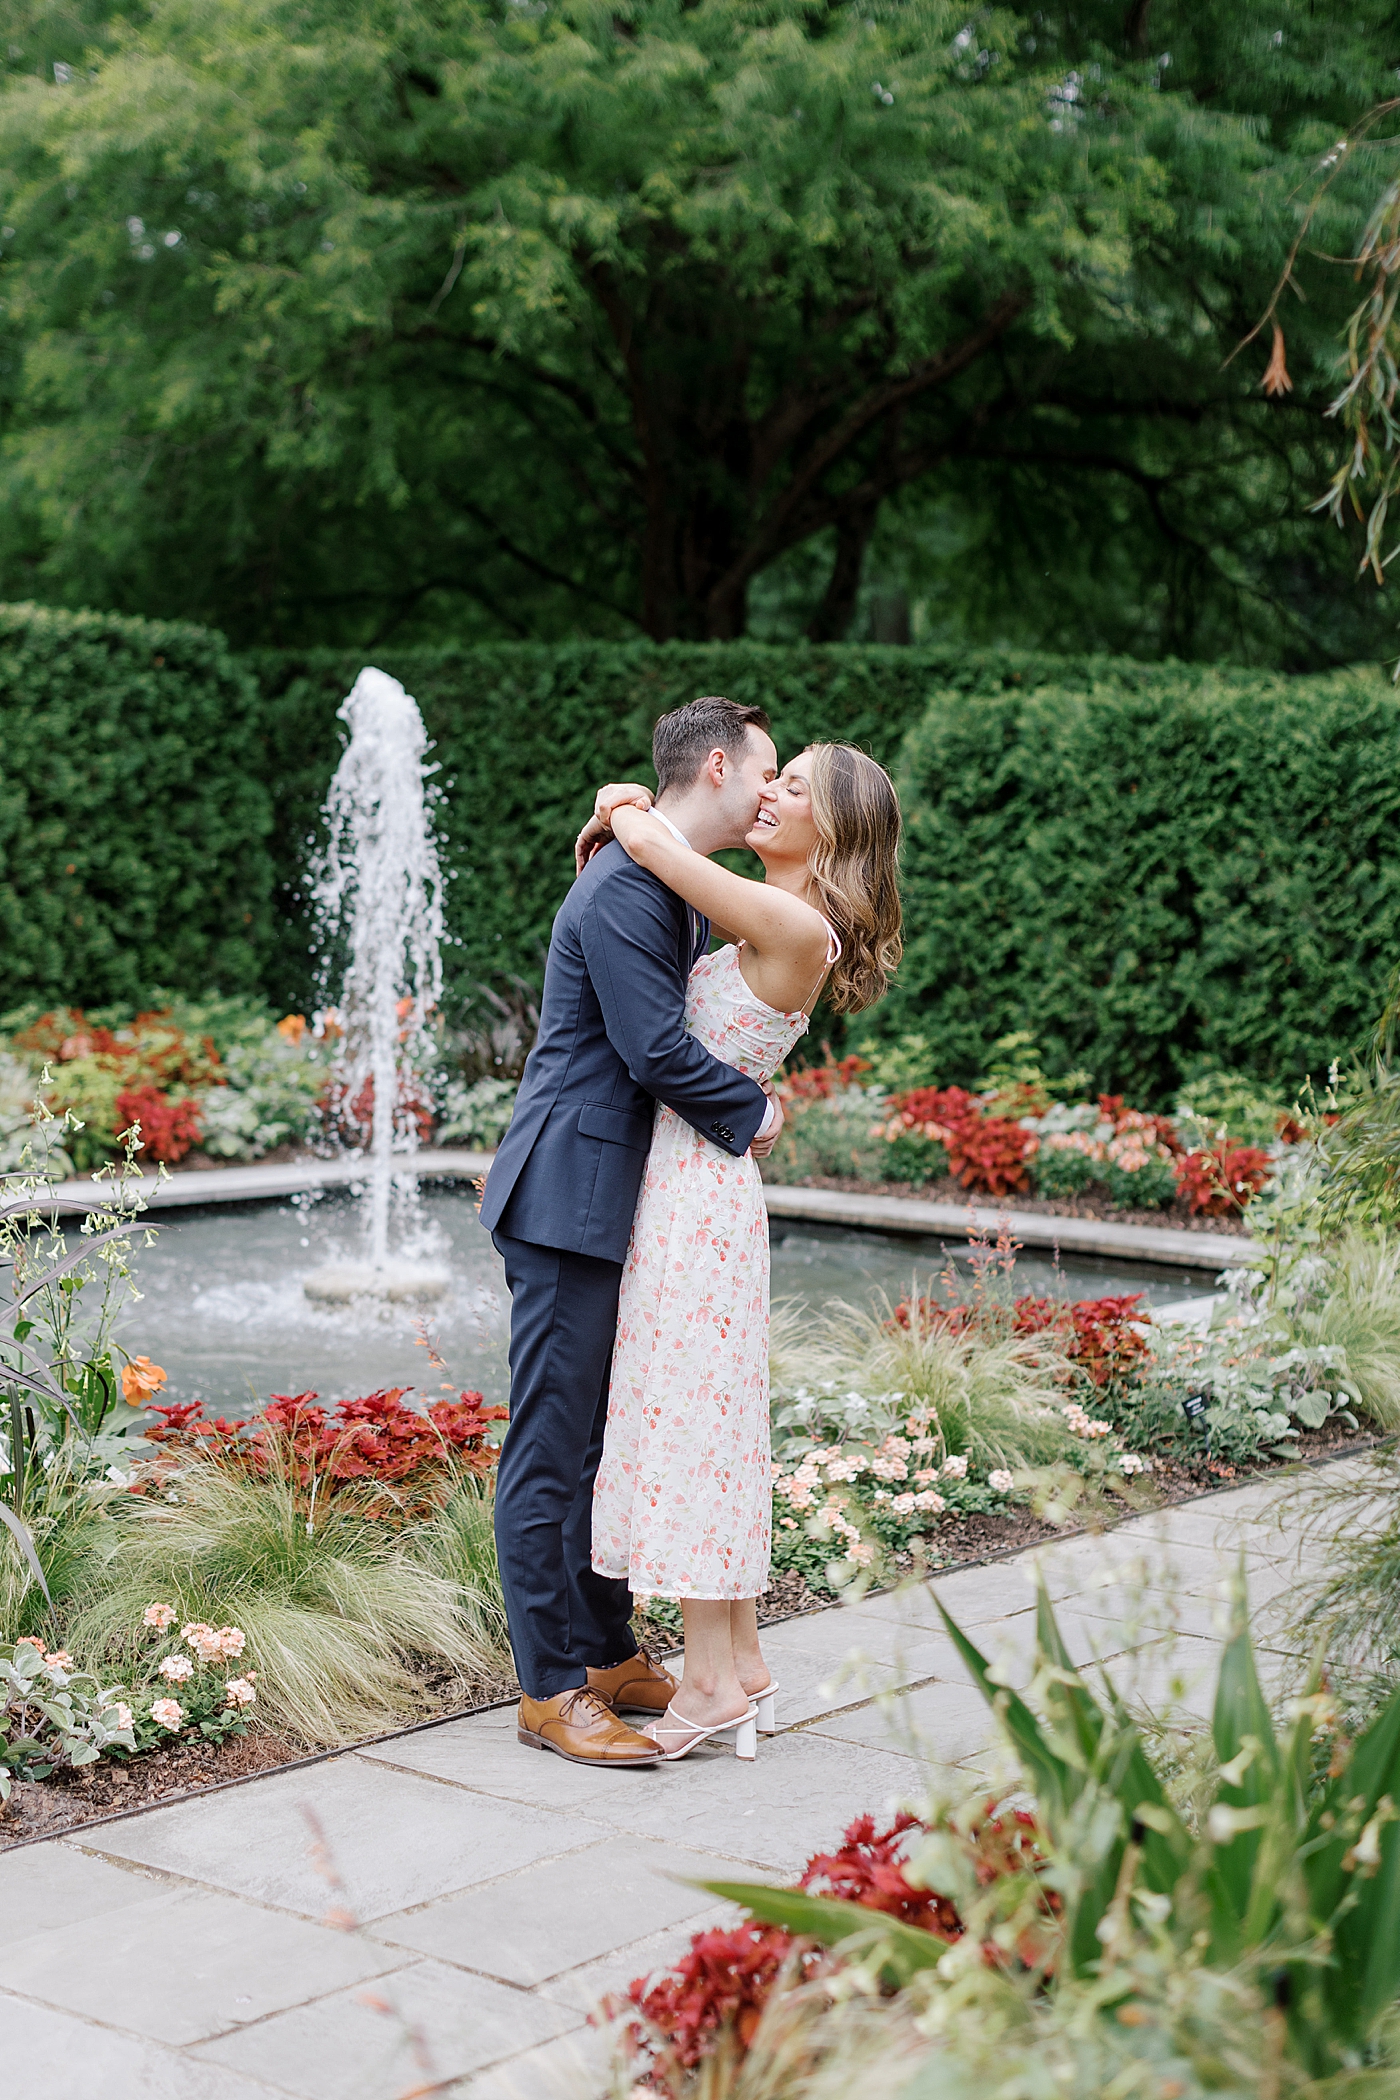 Couple embracing in a park | Engagement Session Guides | Photo by Hope Helmuth Photography